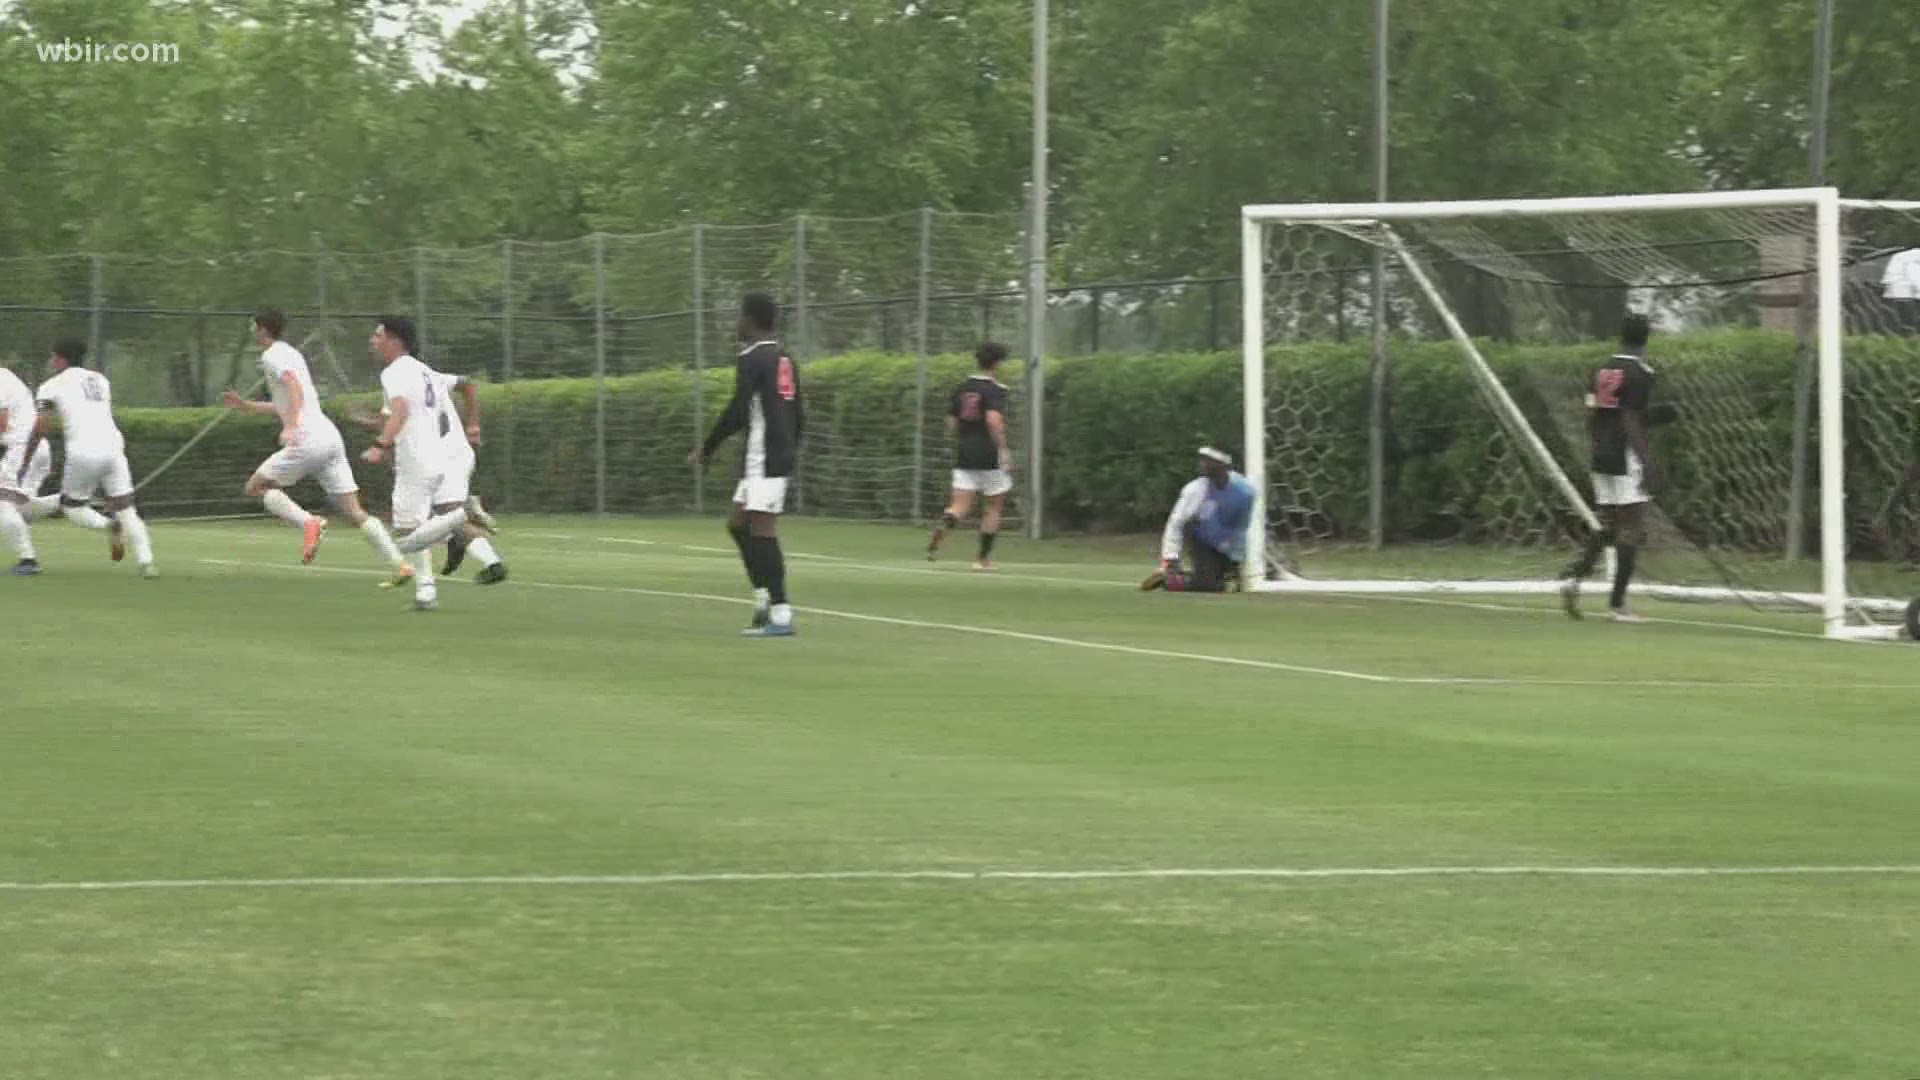 Teams from across the state battled in Murfreesboro for a state championship. Two local soccer teams fought to the last second, and Austin-East took home the trophy.